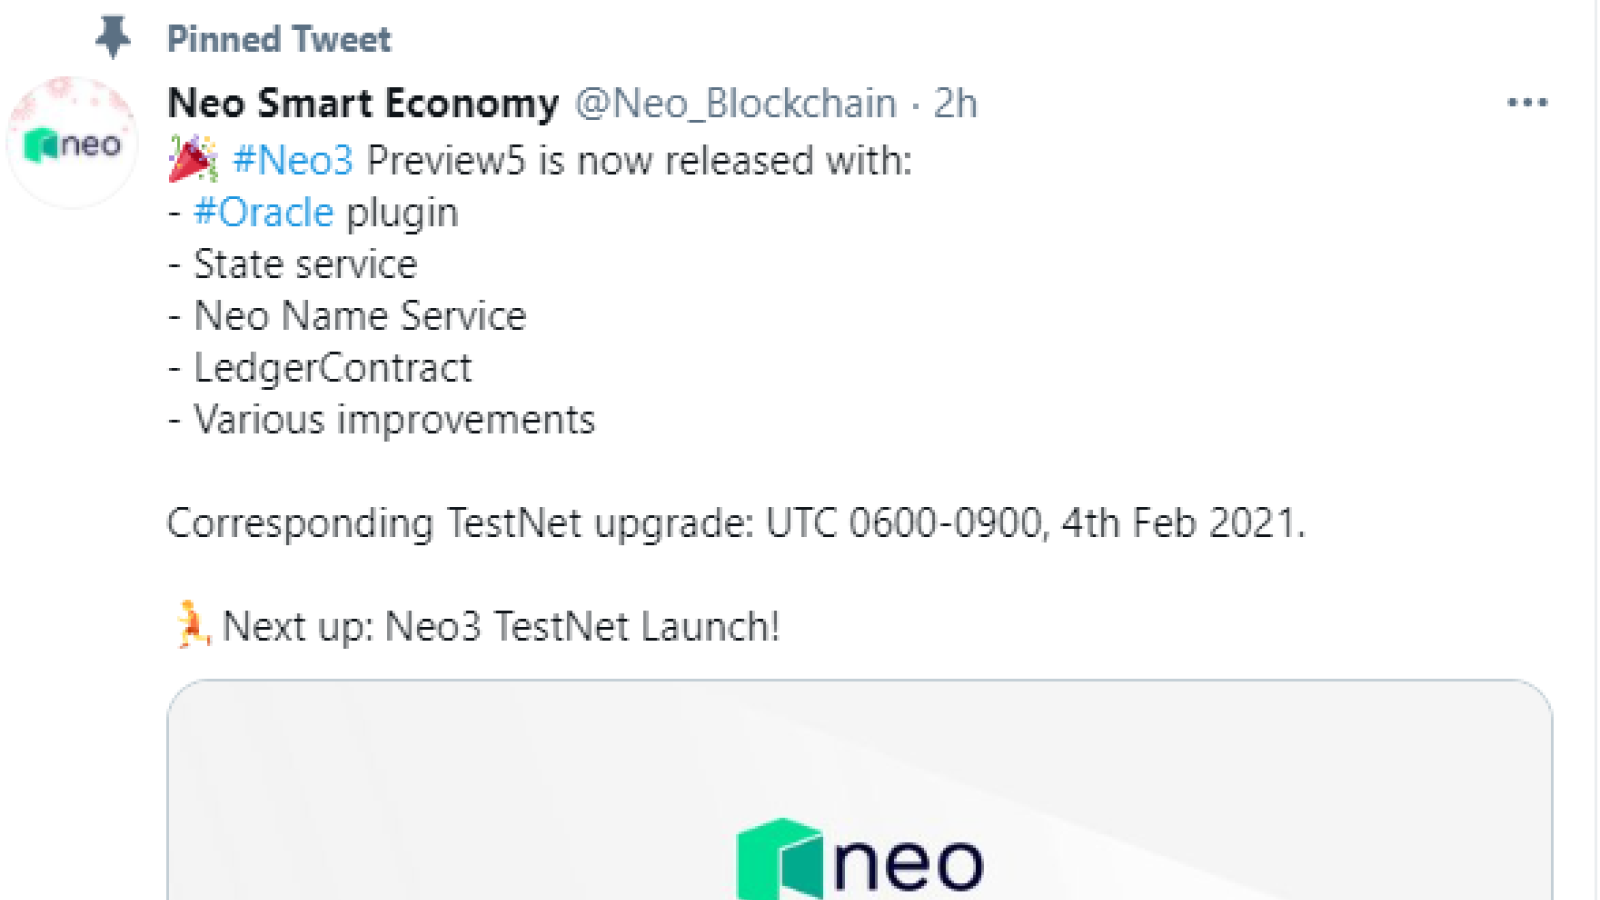 Neo3 testnet is ready for a crucial upgrade